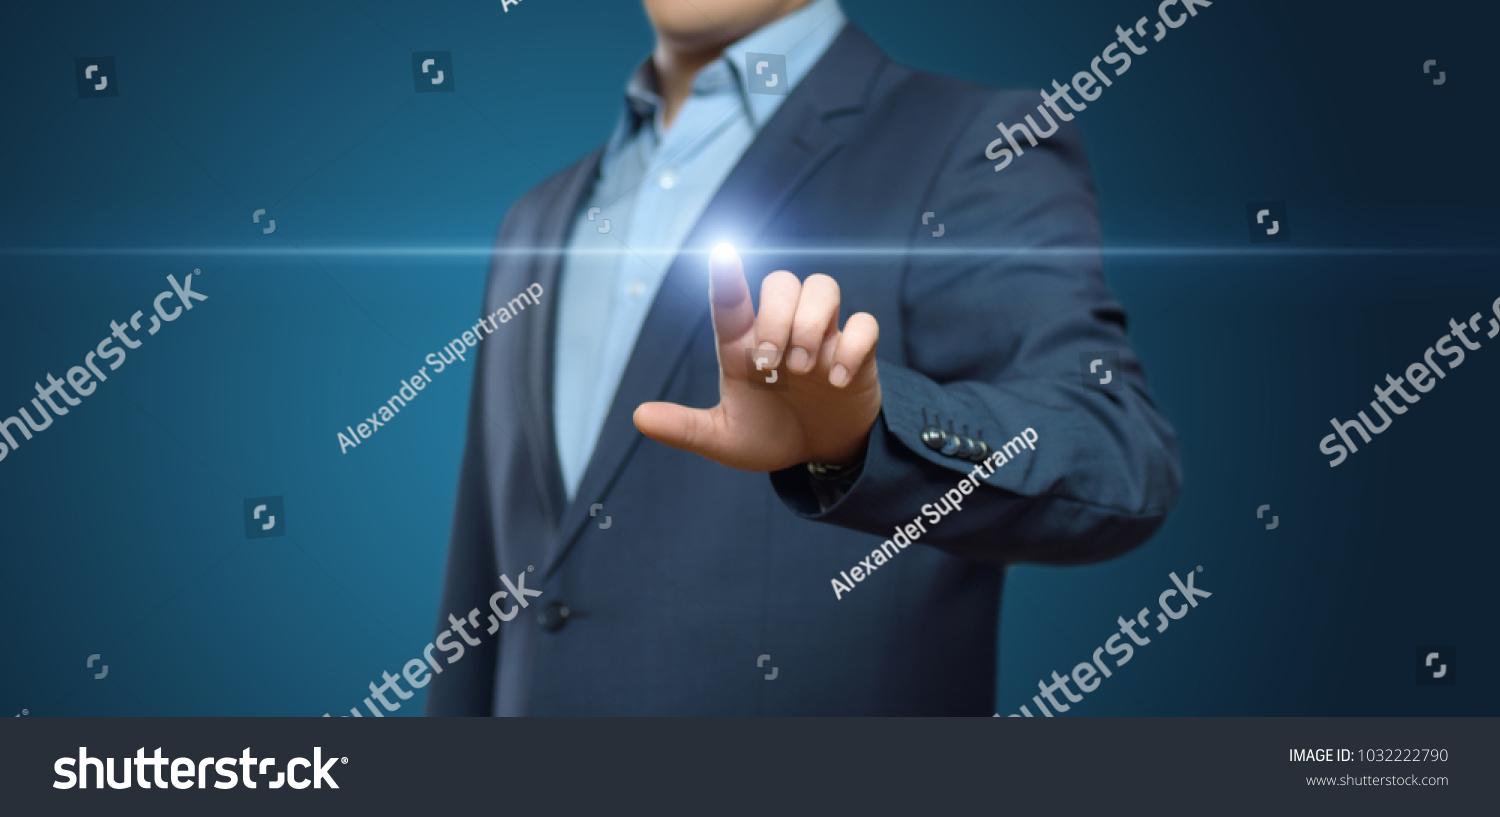 Businessman pressing button. Innovation technology internet business concept. Space for text. #1032222790